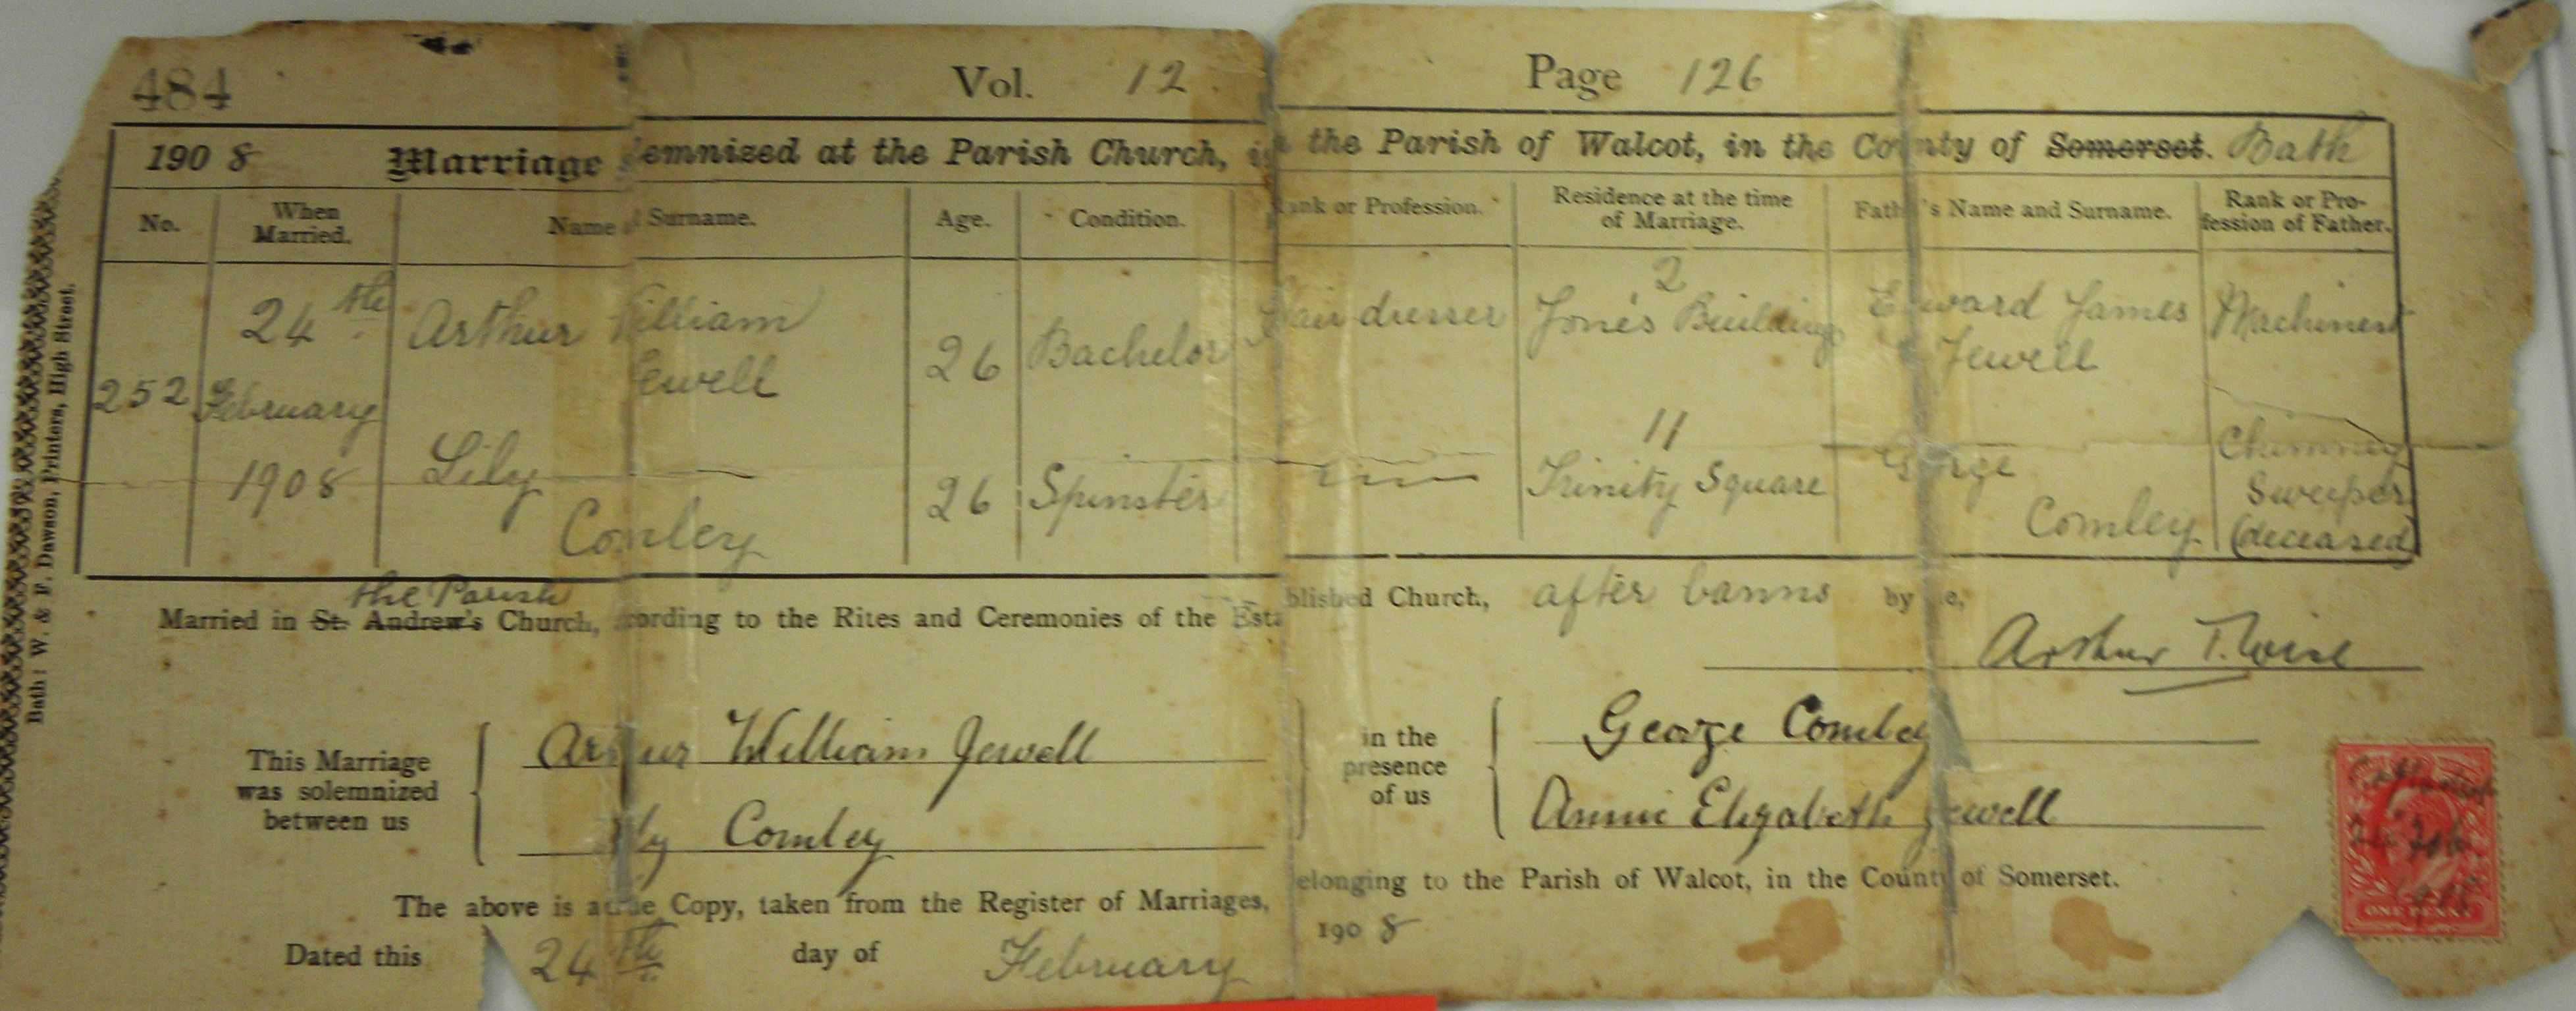 Jewell marriage certificate